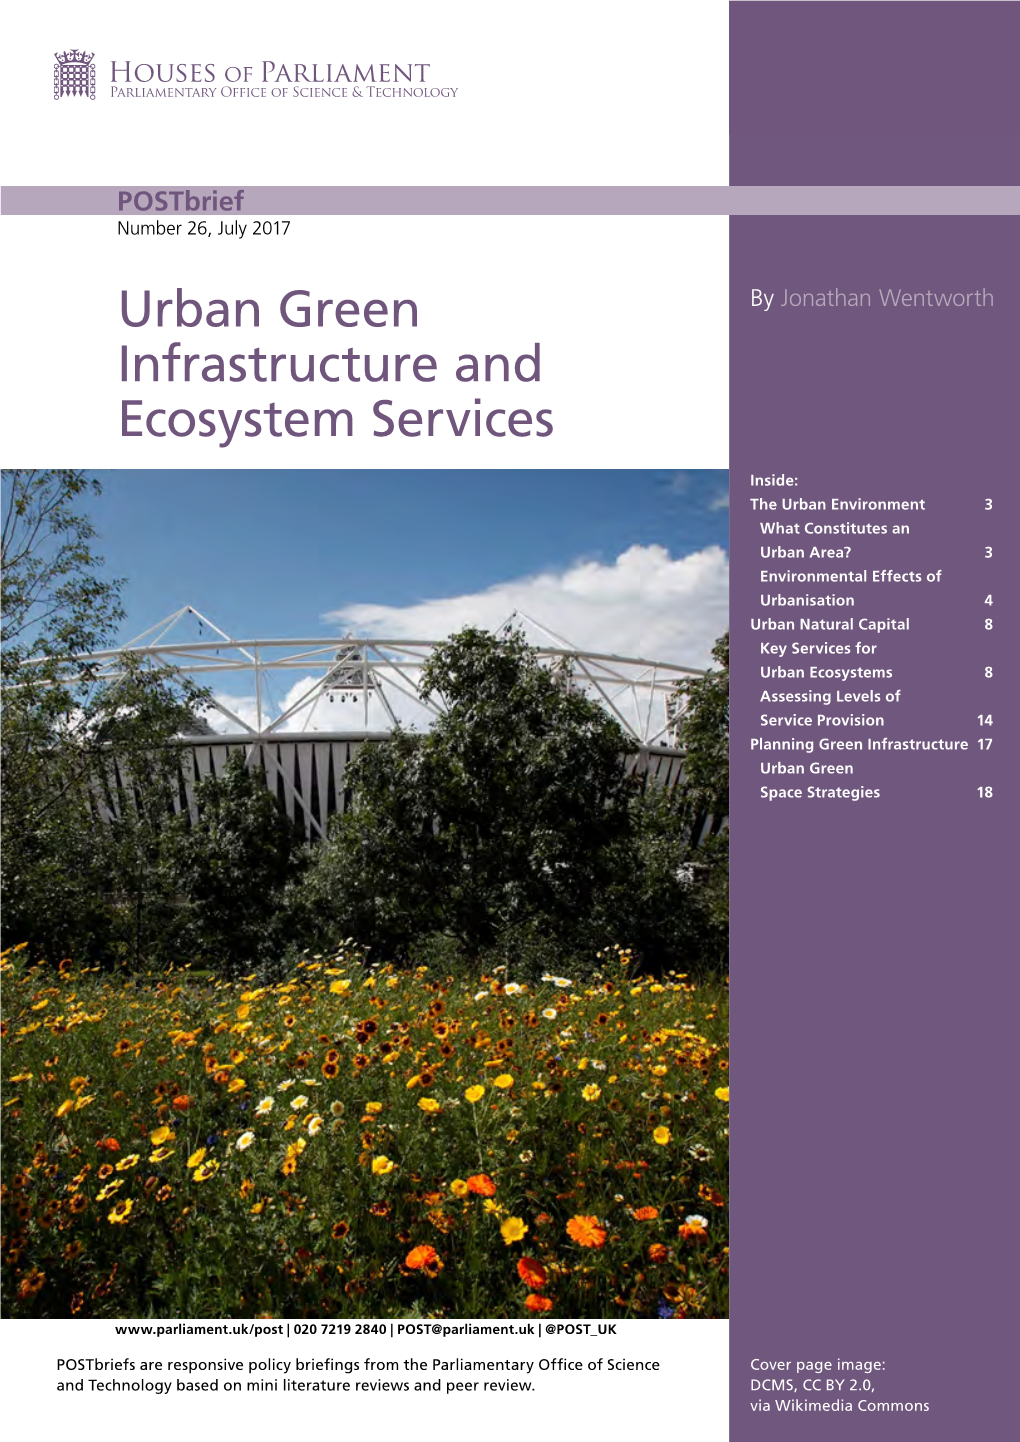 Urban Green Infrastructure and Ecosystem Services